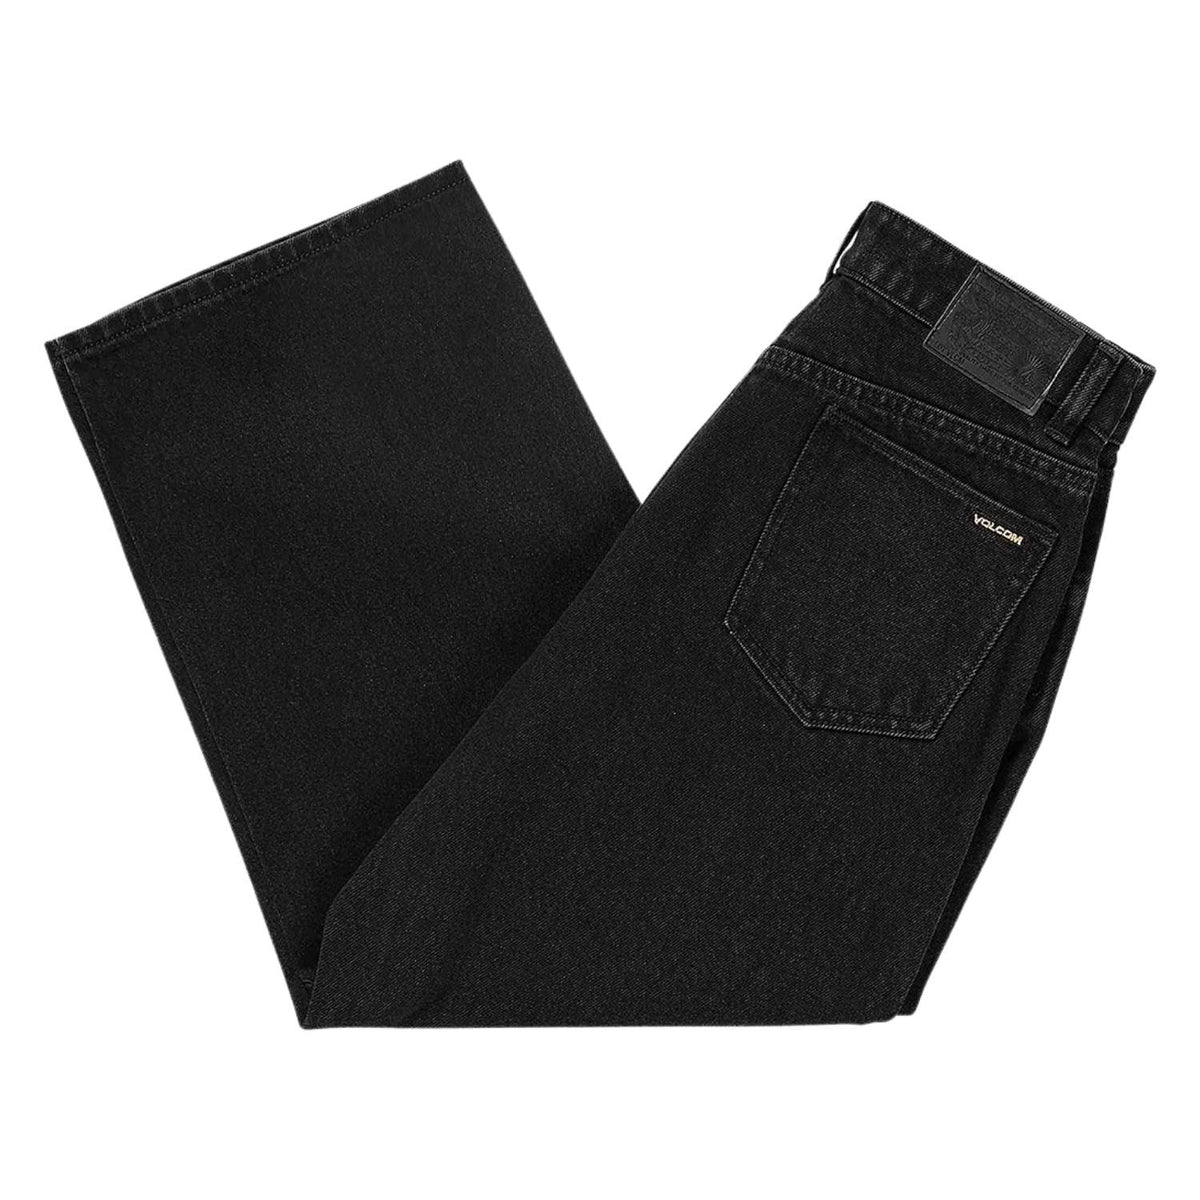 Volcom Youth Boys Billow Relaxed Fit Denim Jeans - Black - Boys Relaxed/Loose Denim Jeans by Volcom